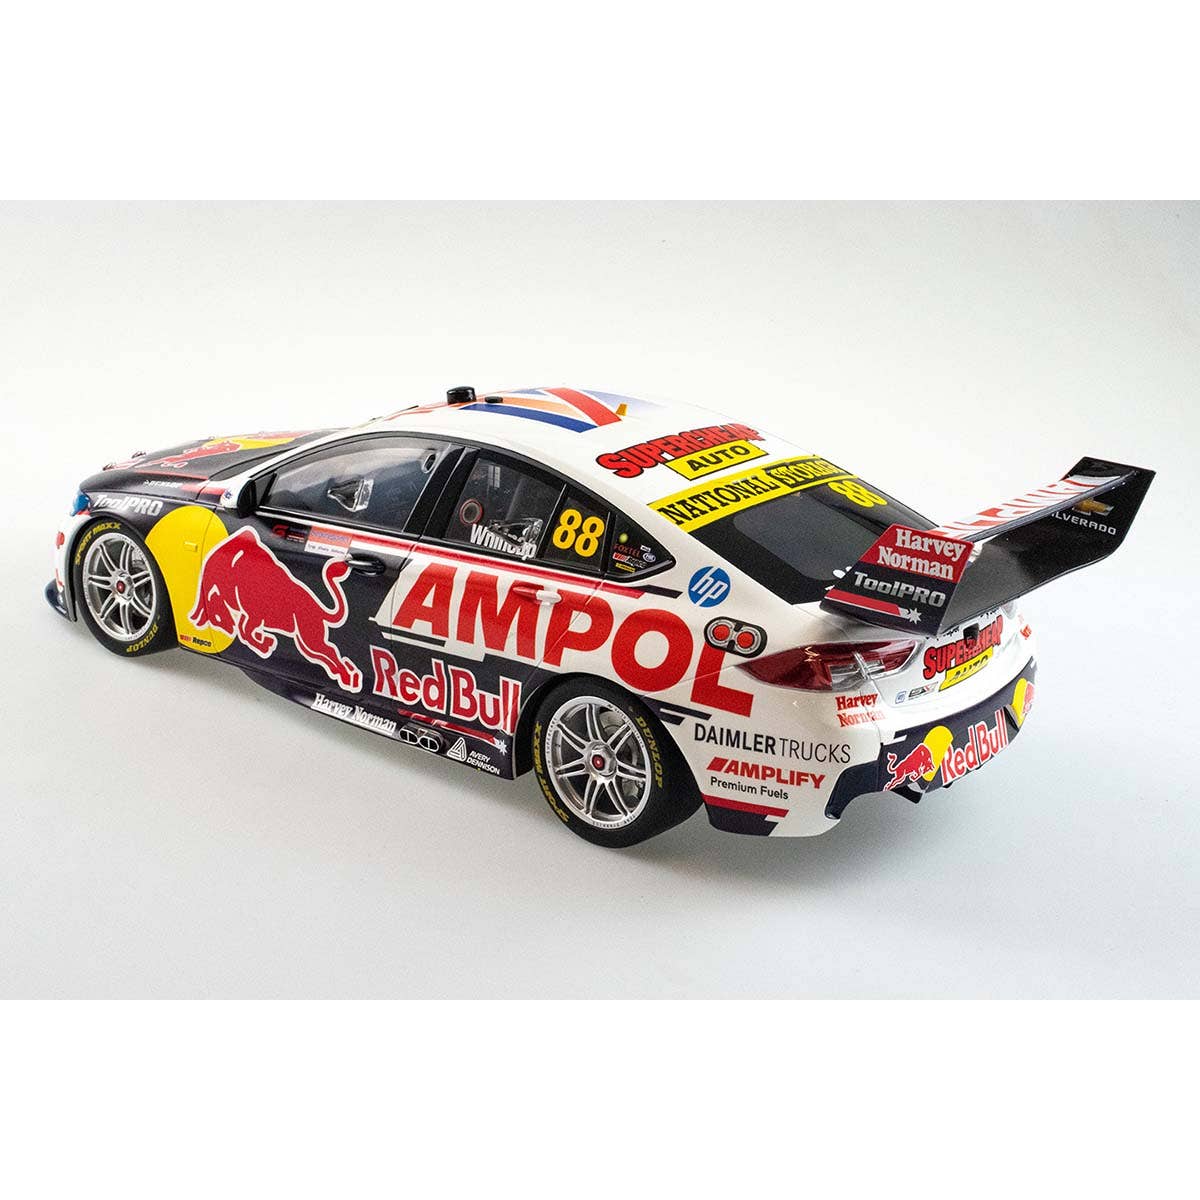 HOLDEN ZB COMMODORE - RED BULL AMPOL RACING #88 - JAMIE WHINCUP - BEAUREPAIRS SYDNEY SUPERNIGHT RACE 29 - LAST FULL-TIME SOLO DRIVE - 1:12 Scale Resin Model Car